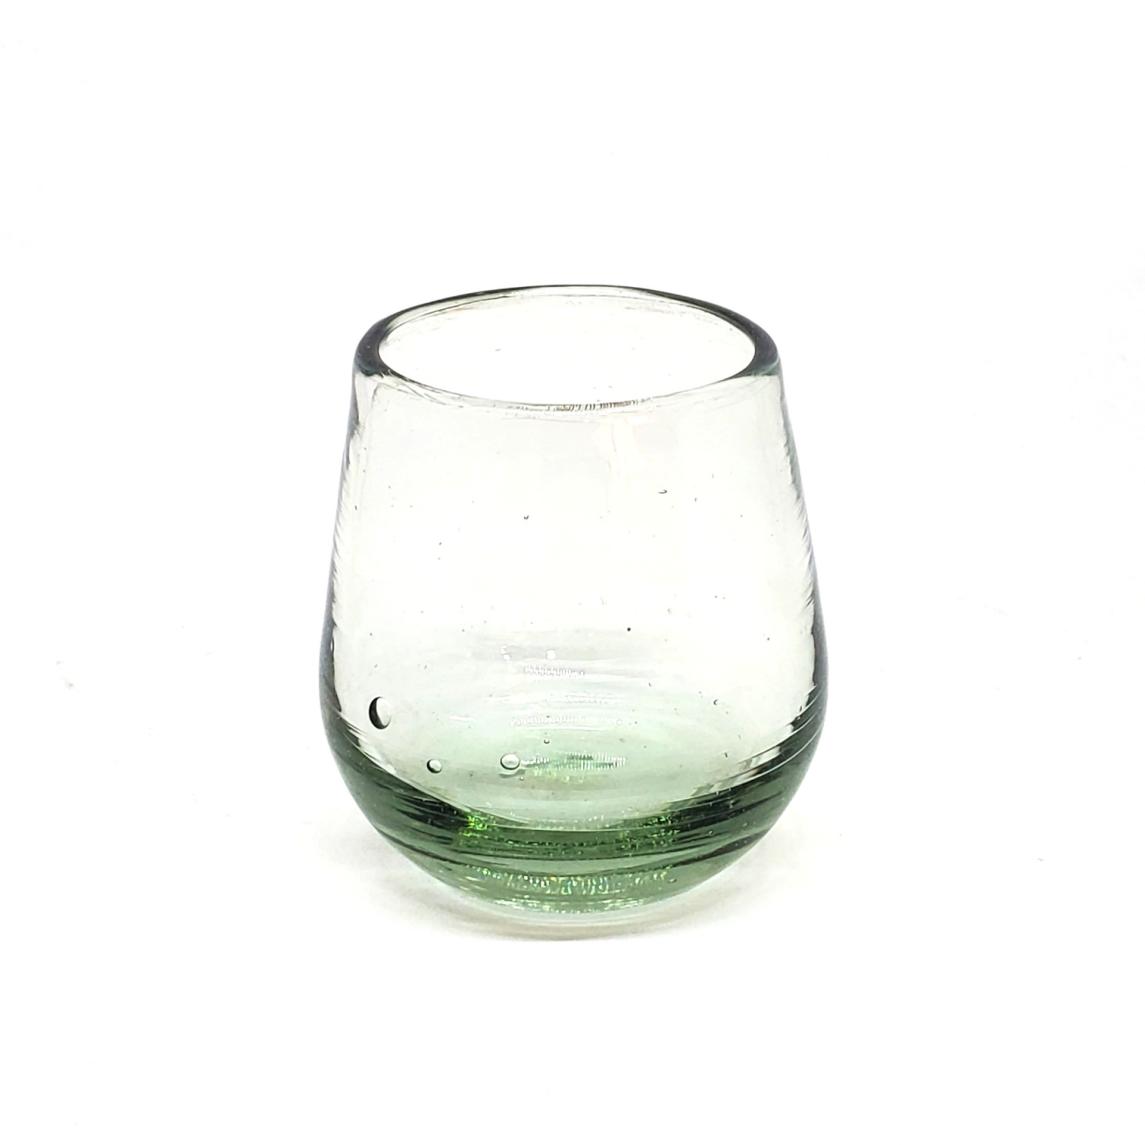 Wholesale MEXICAN GLASSWARE / Clear 6 oz Roly Poly Glasses  / Our Clear Blown Glasses are individually handcrafted from recycled glass, making each of them unique works of art.